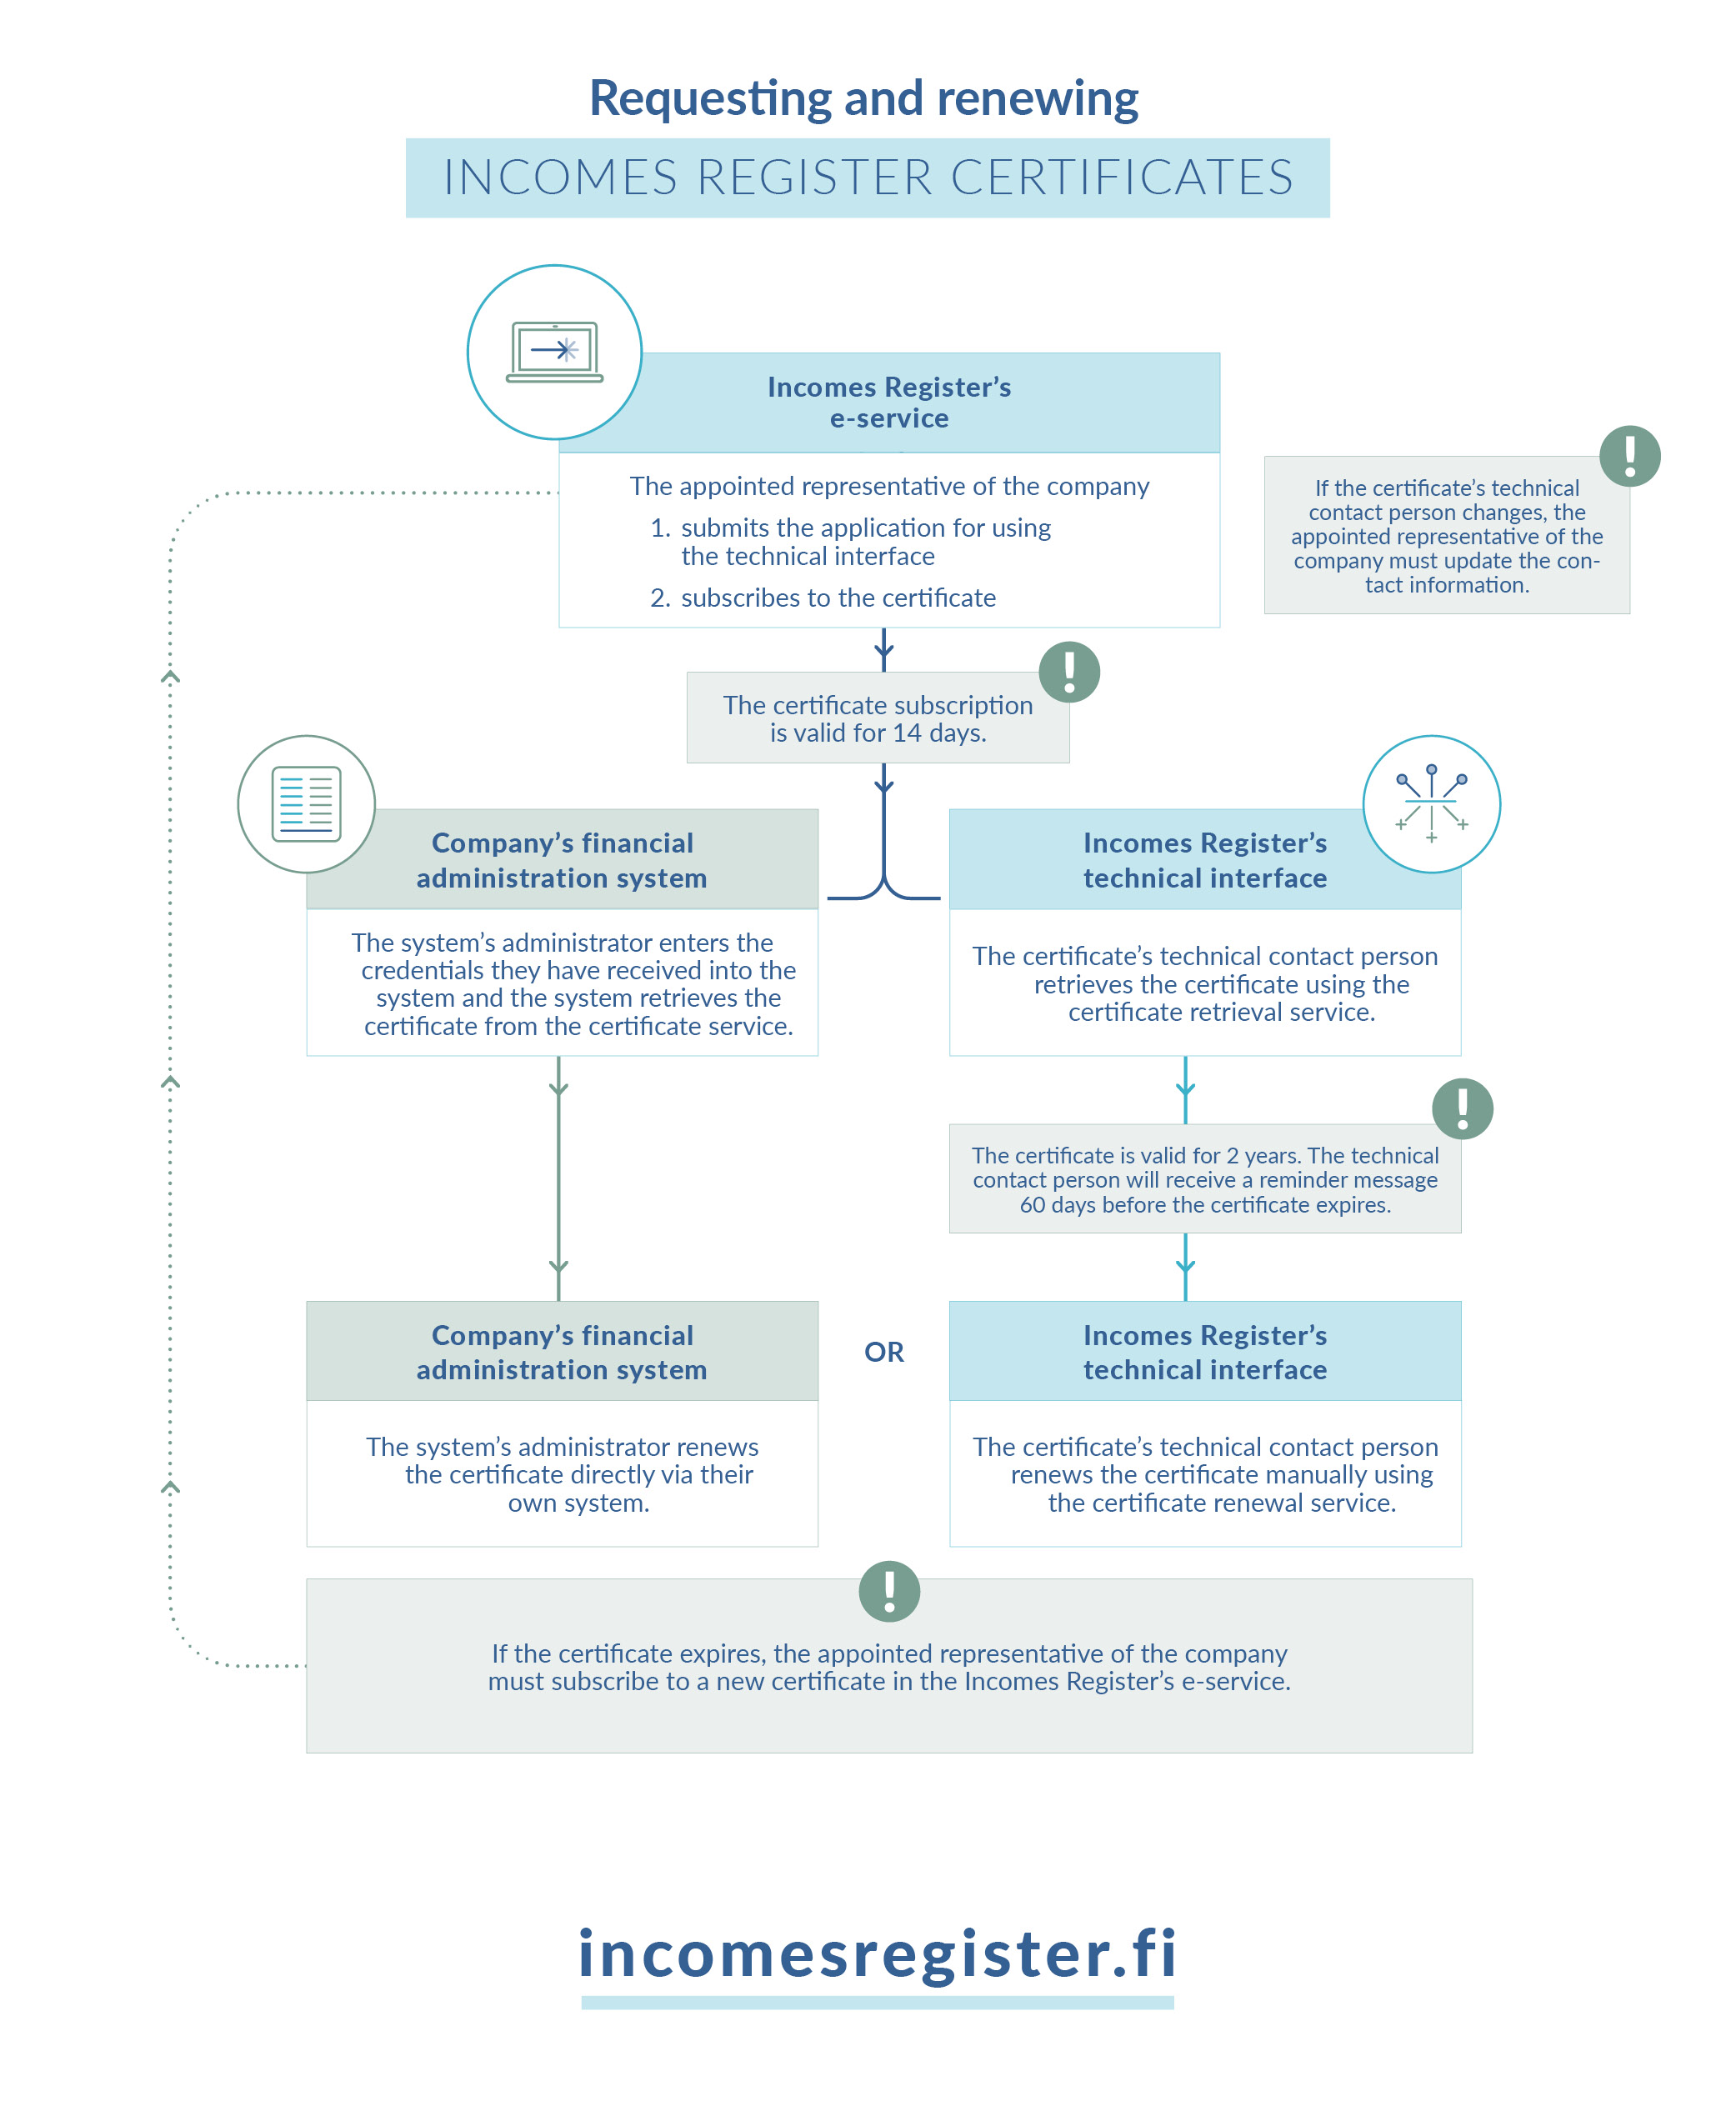 Infographic depicting how to request and renew certificates in the Incomes Register.